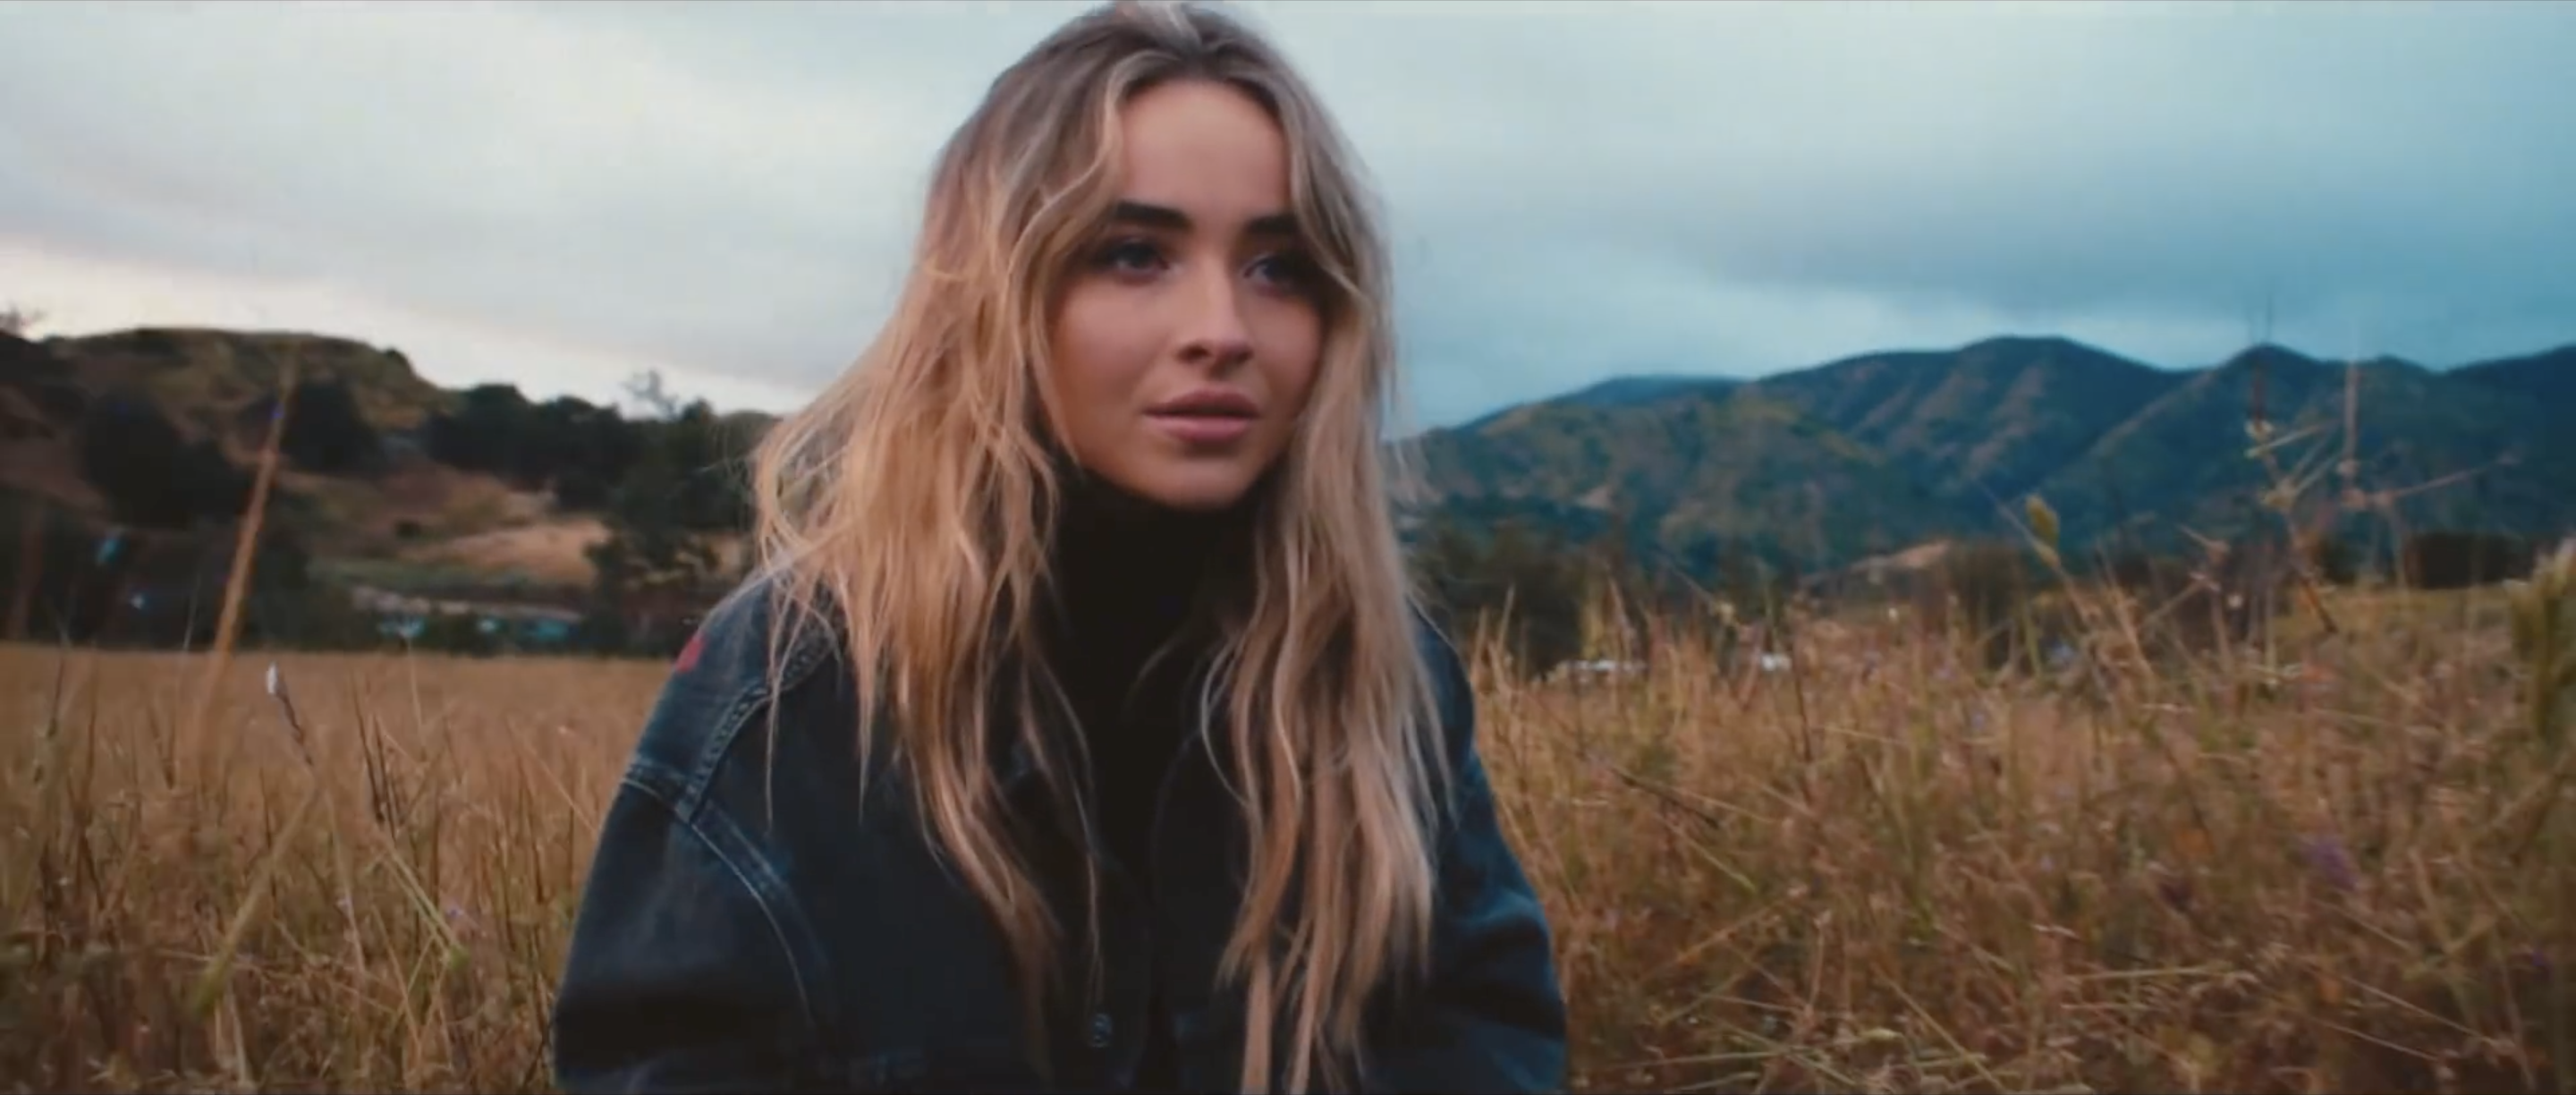 Sabrina Carpenter on Her Resilience During 'Really Dark Times' – StyleCaster